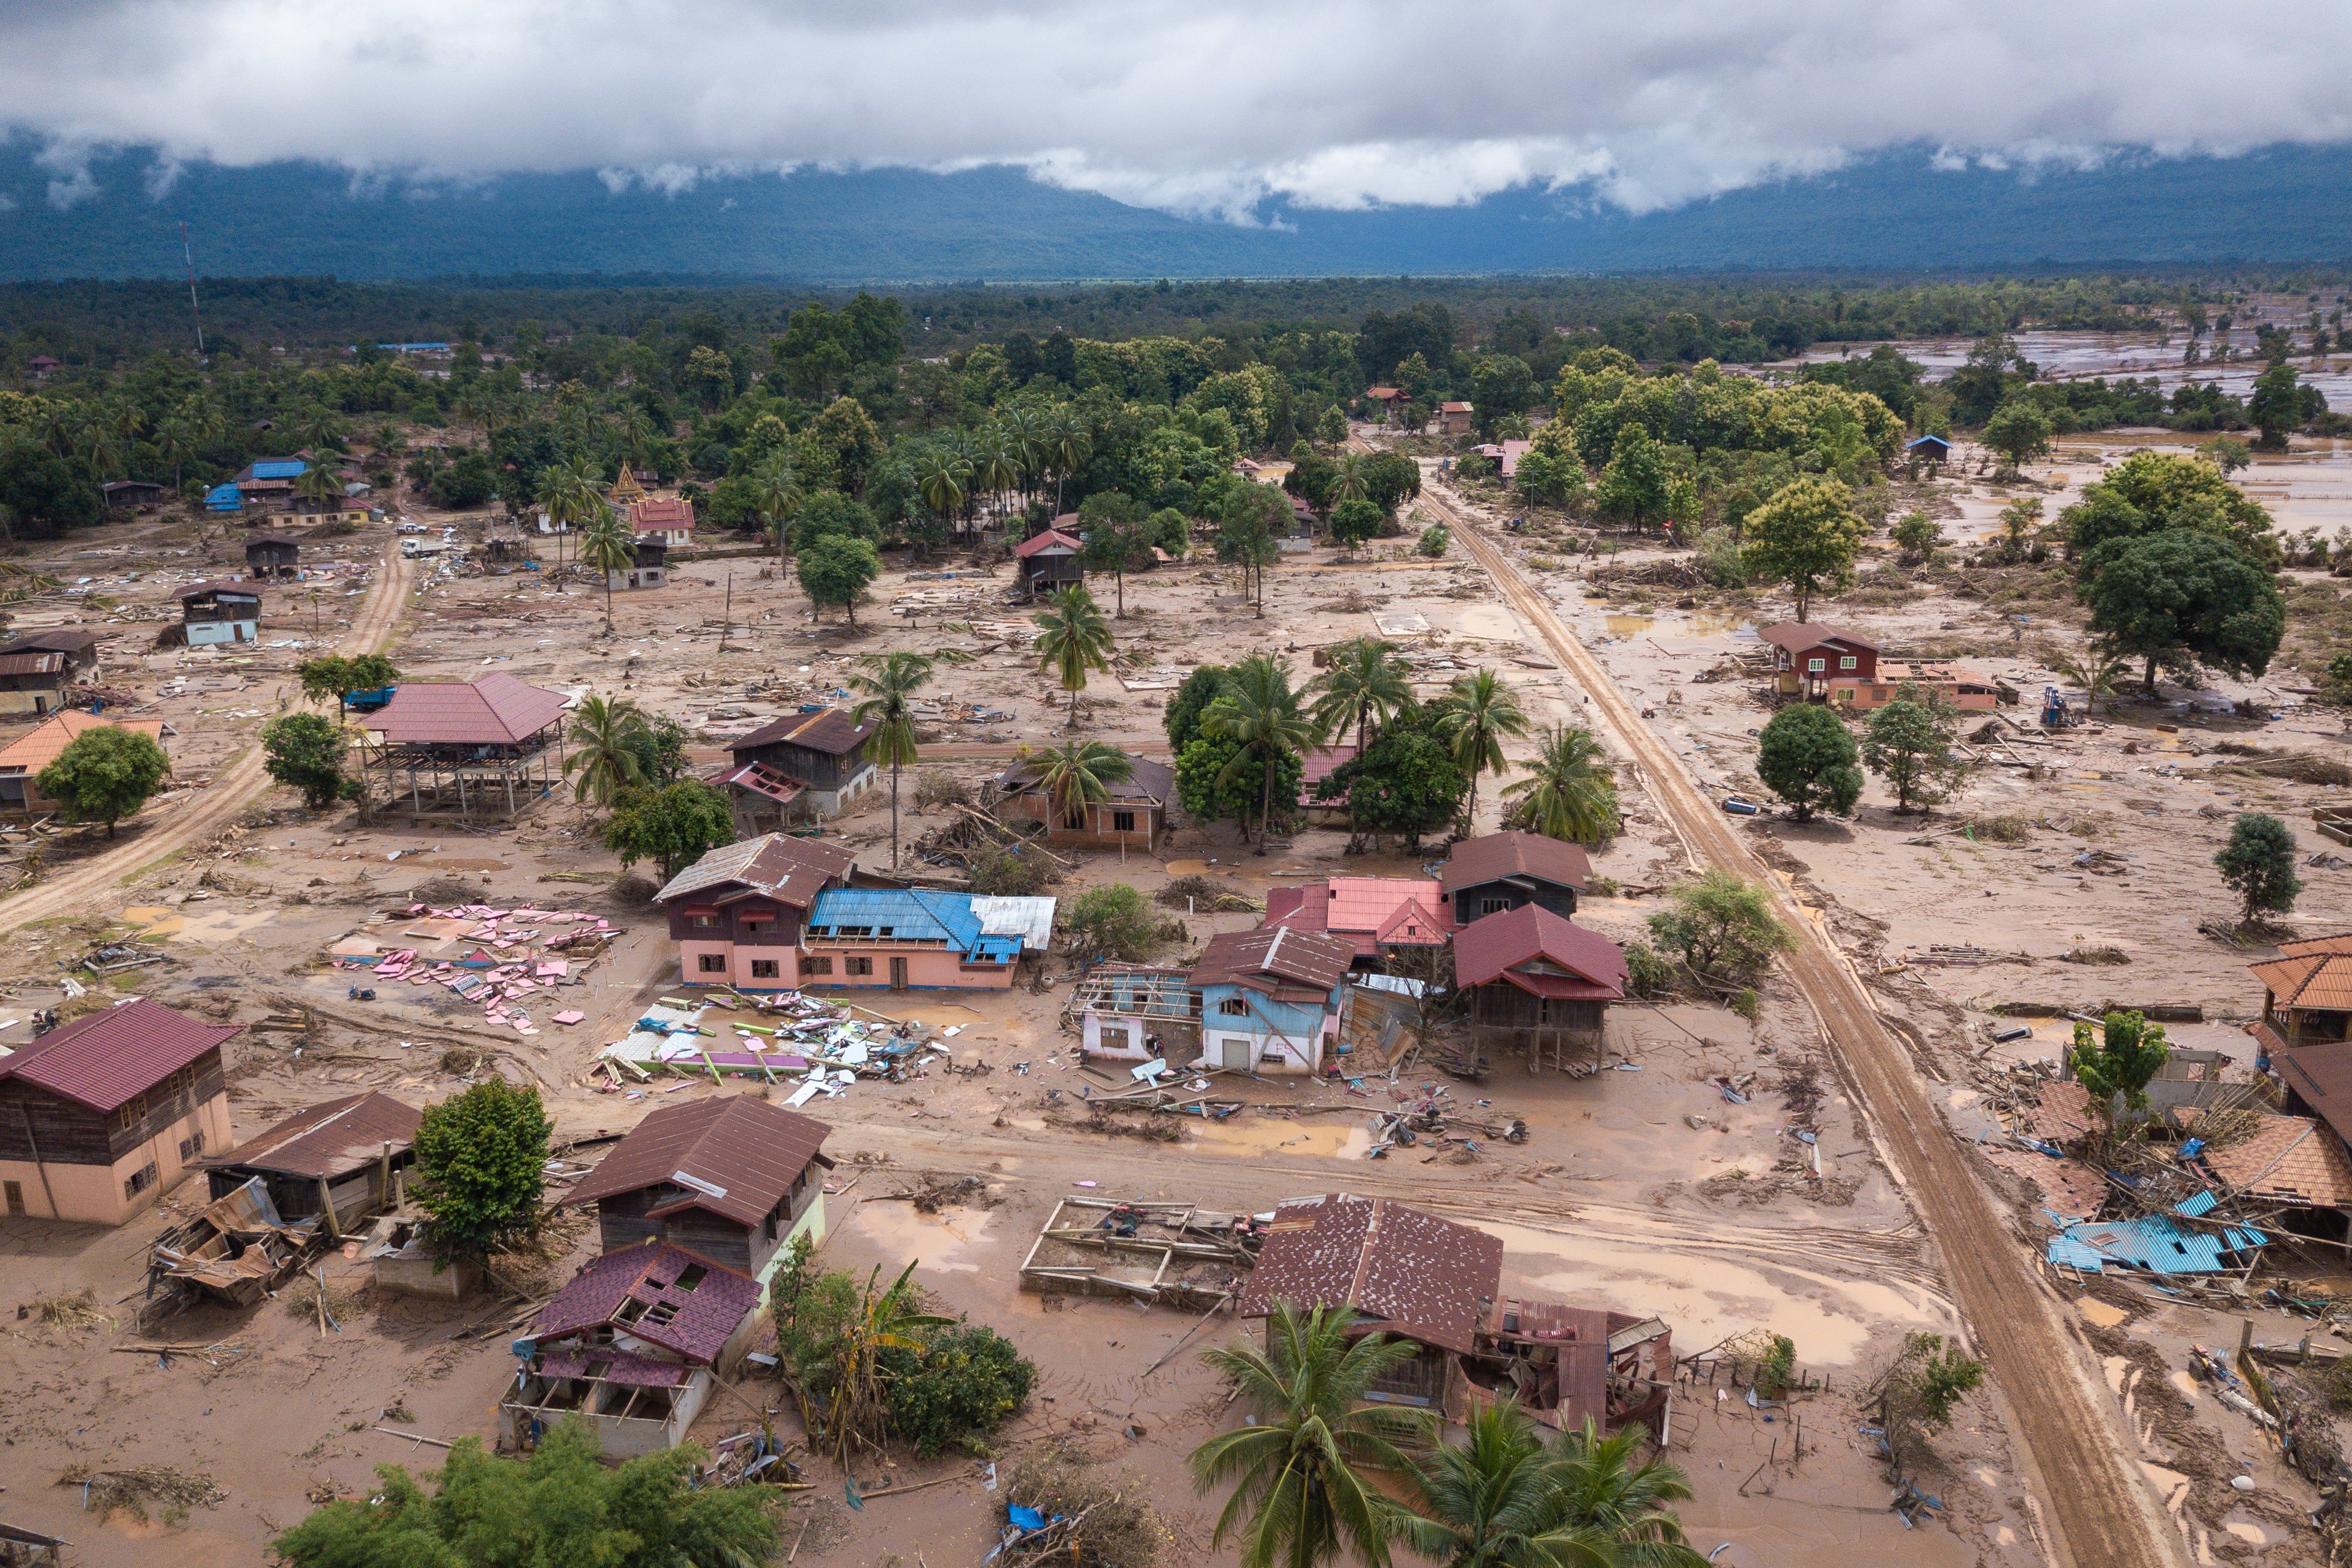 On July 23, floodwaters from a failed dam swallowed entire villages, killing 39 people and displacing thousands. Are innocent villagers paying the price for country’s ambitious dream of becoming the ‘battery of Asia’?